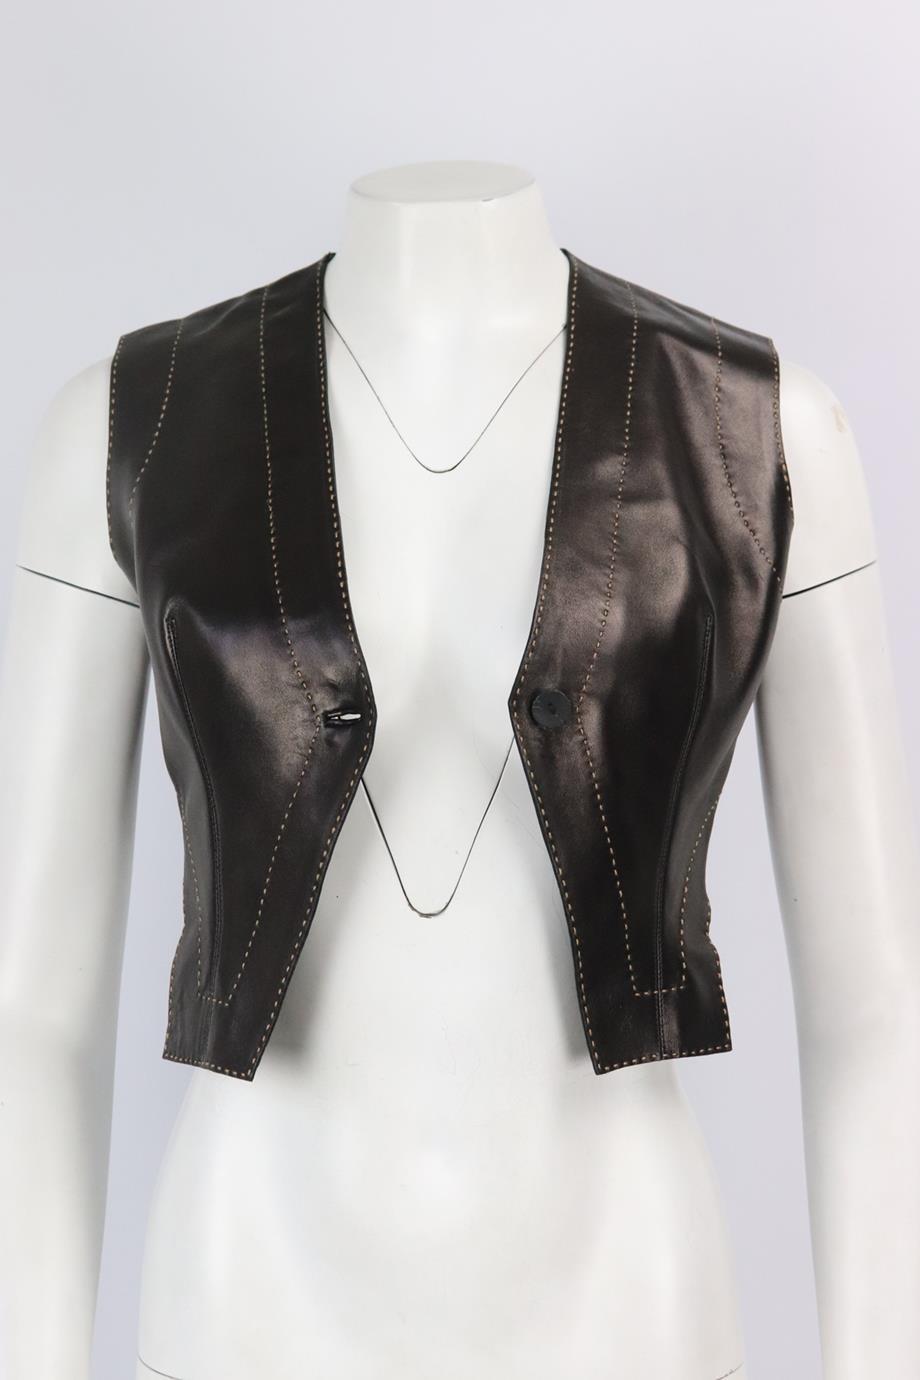 Azzedine Alaïa leather waistcoat. Brown. Sleeveless, v-neck. Button fastening at front. 100% Lambskin; lining: 100% polyester. Size: FR 38 (UK 10, US 6, IT 42). Bust: 32.2 in. Waist: 28 in. Length: 18.5 in. Very good condition - No sign of wear; see